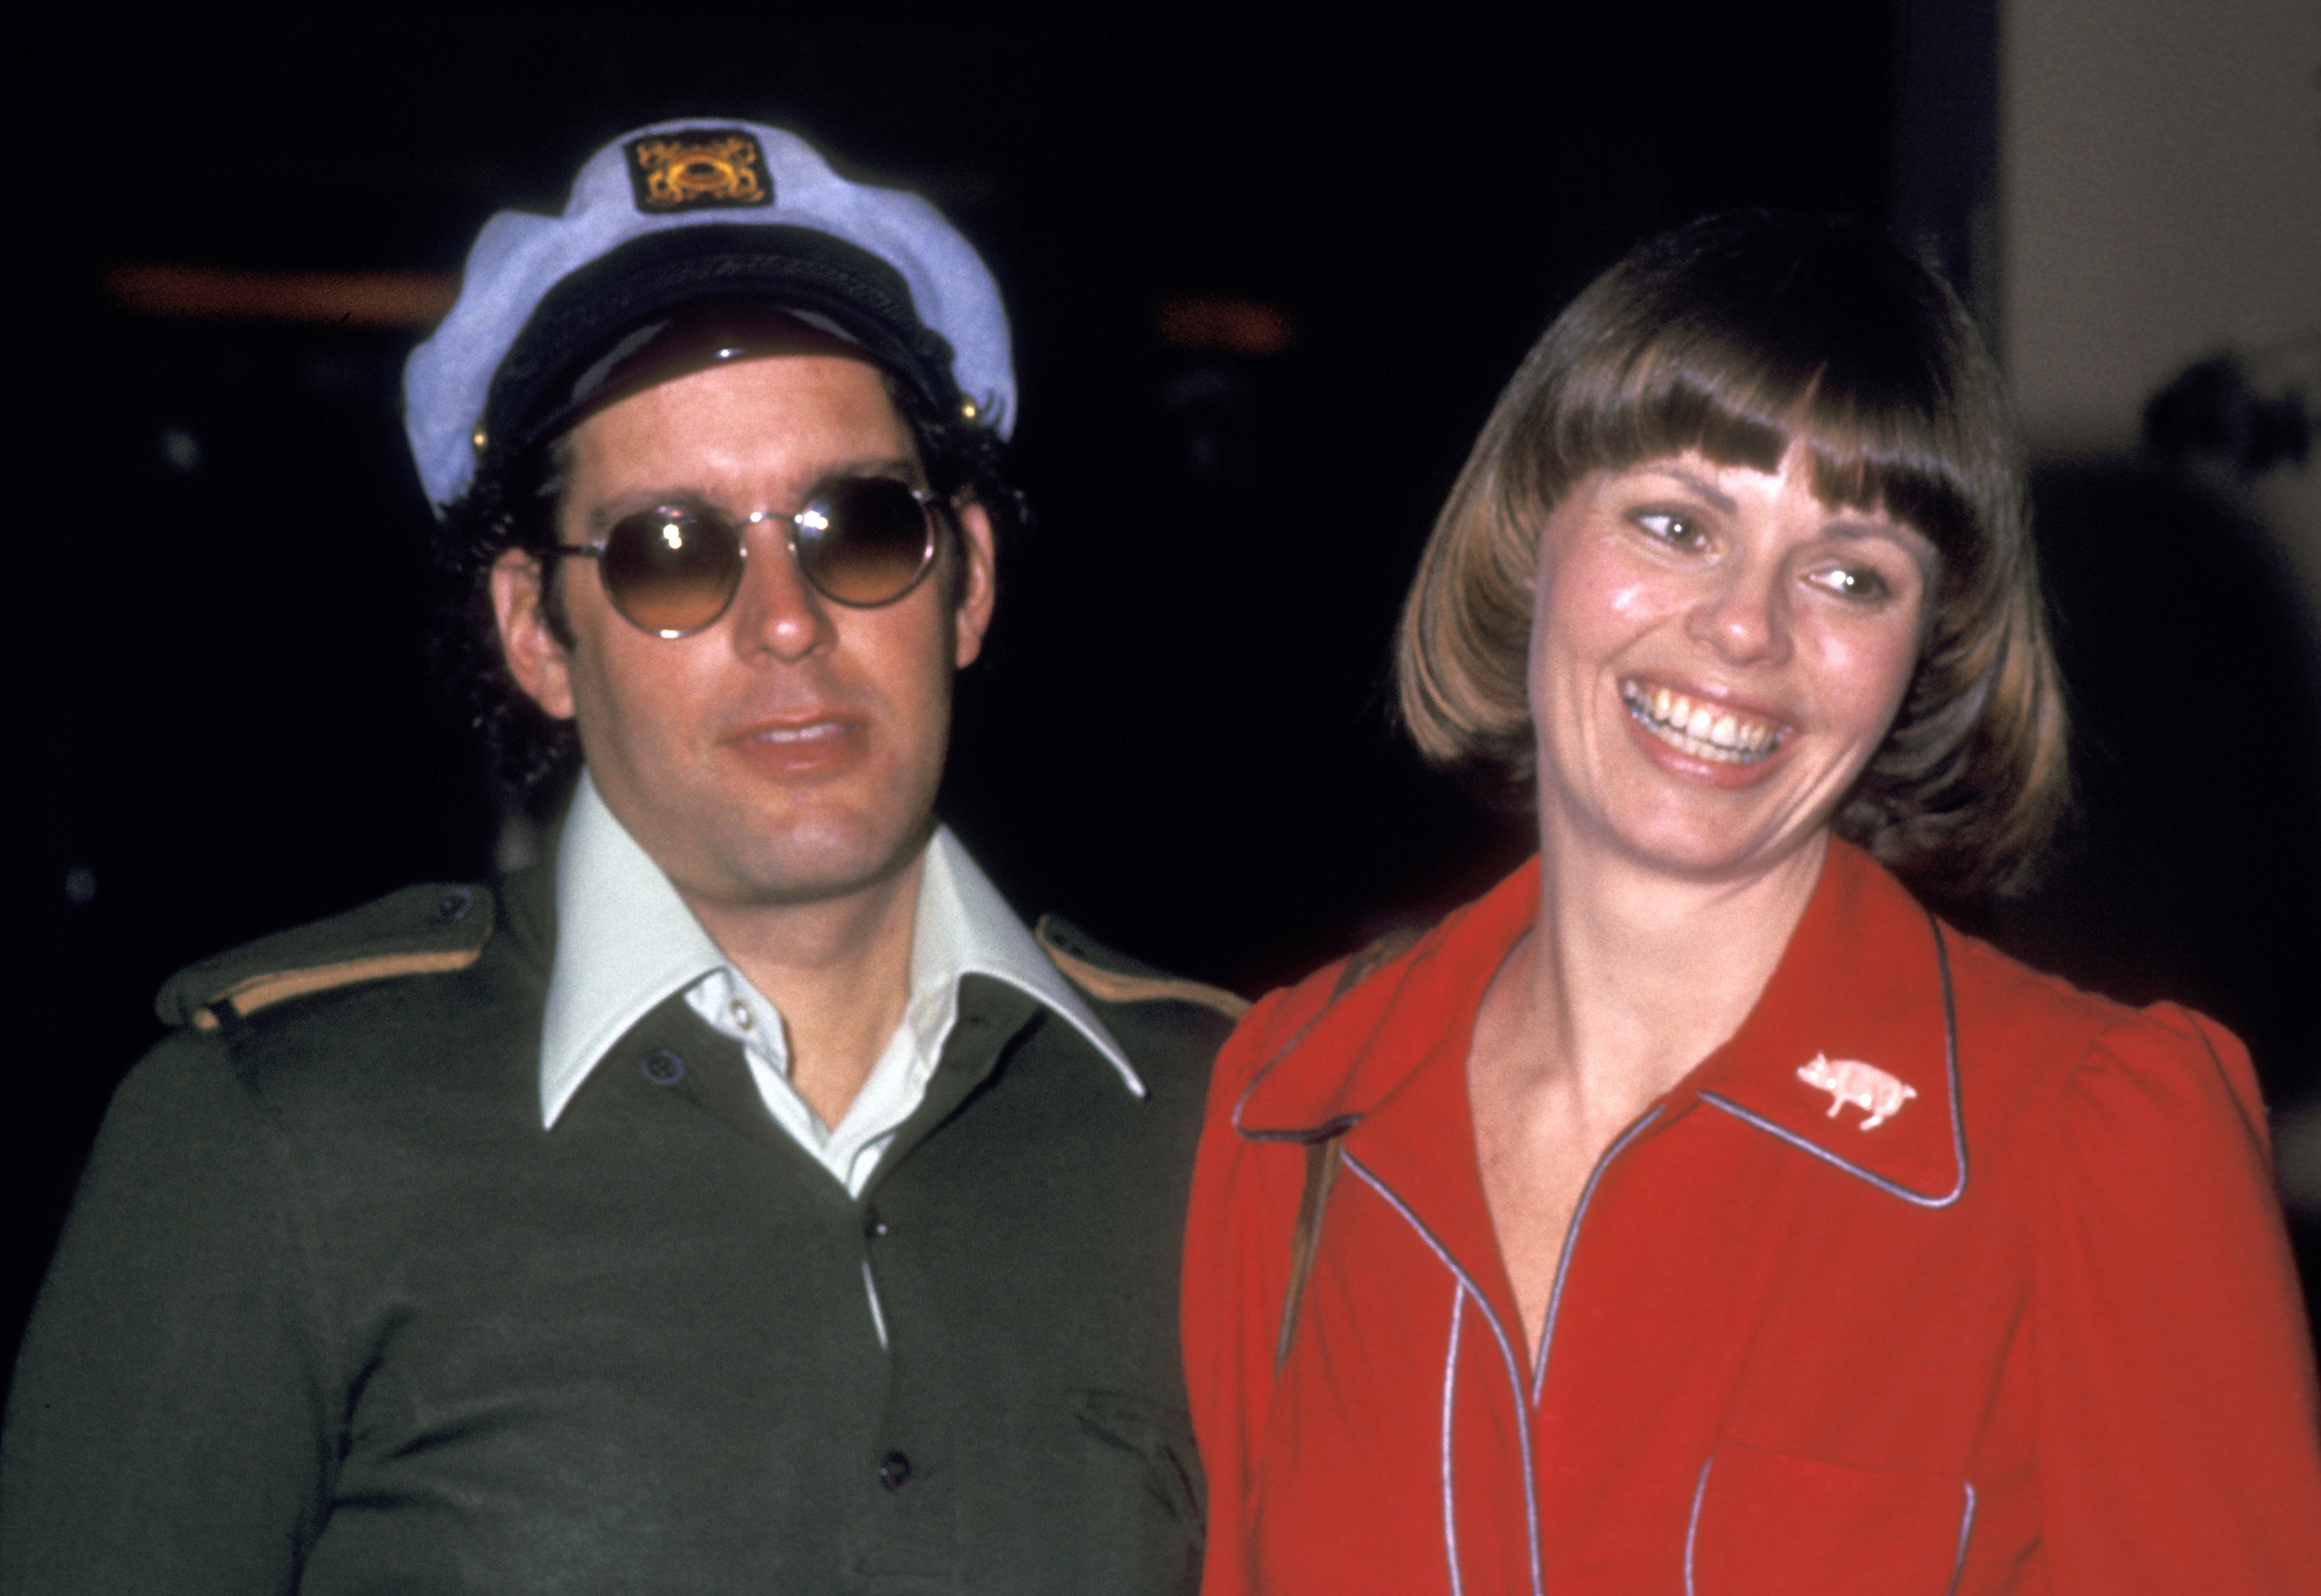 <p>There are those historians who believe the first true example of yacht rock came with this popular '70s staple from the "Captain" Daryl Dragon<span> and his wife</span> Toni Tennille. Now, Neil Sedaka<span> wrote "Love Will Keep Us Together" and originally recorded the song two years earlier. Still, the duo's version was </span><a href="https://www.youtube.com/watch?v=_QNEf9oGw8o"><span>more poppy, with a carefree vibe</span></a><span> that's ideal for FM radio. While Captain & Tennille's cover won a Record of the Year Grammy Award, Sedaka has noted that the Beach Boys were one of the inspirations for the tune. This makes sense since many music critics, professionals, historians, etc.. have credited the yacht rock genre as somewhat of an offshoot from the Beach Boys' collective sound. </span></p><p><a href='https://www.msn.com/en-us/community/channel/vid-cj9pqbr0vn9in2b6ddcd8sfgpfq6x6utp44fssrv6mc2gtybw0us'>Follow us on MSN to see more of our exclusive entertainment content.</a></p>